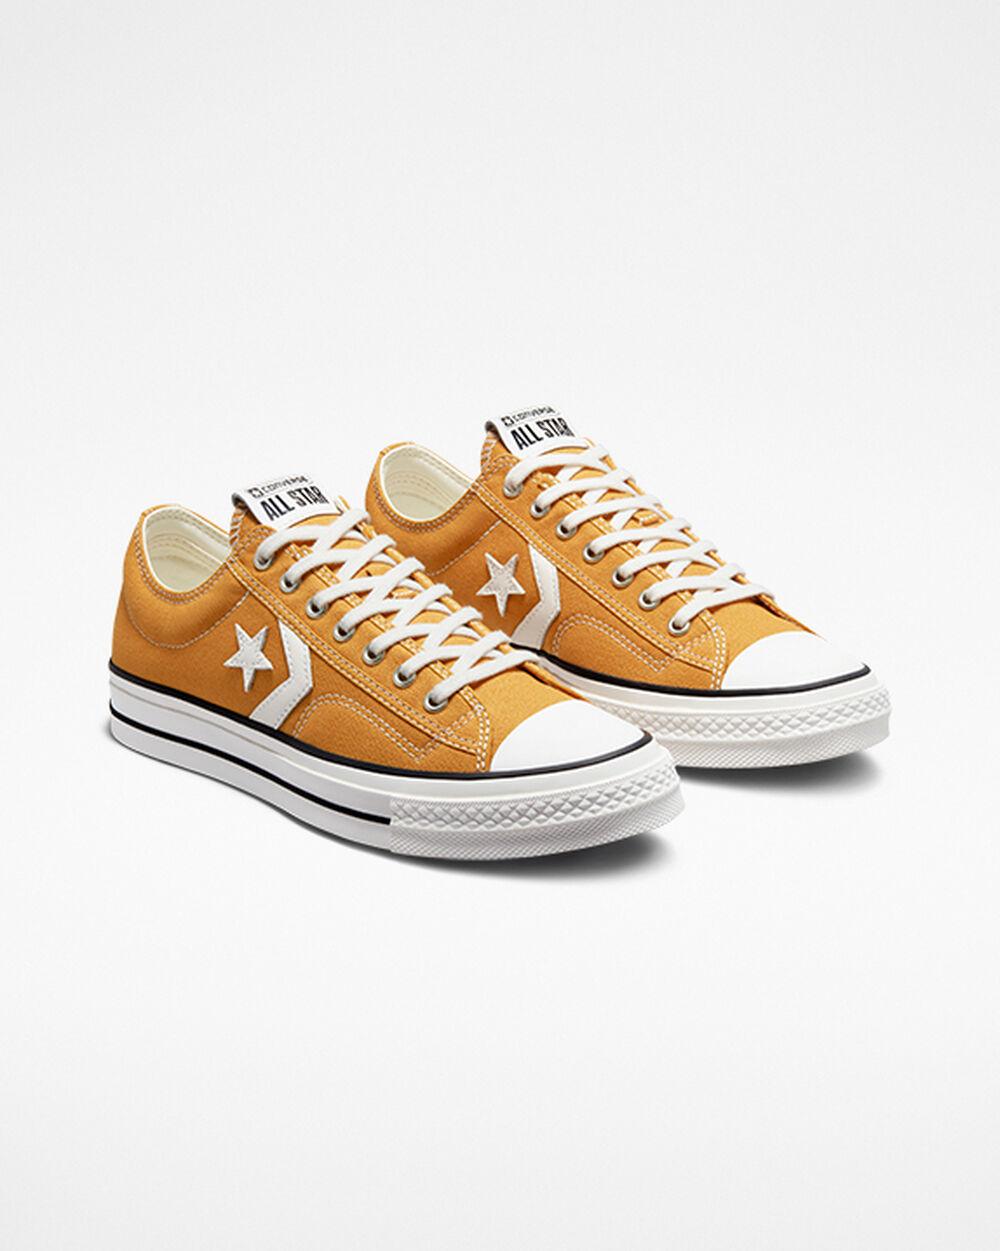 CONVERSE PLAYER 76 YELLOW SNEAKERS